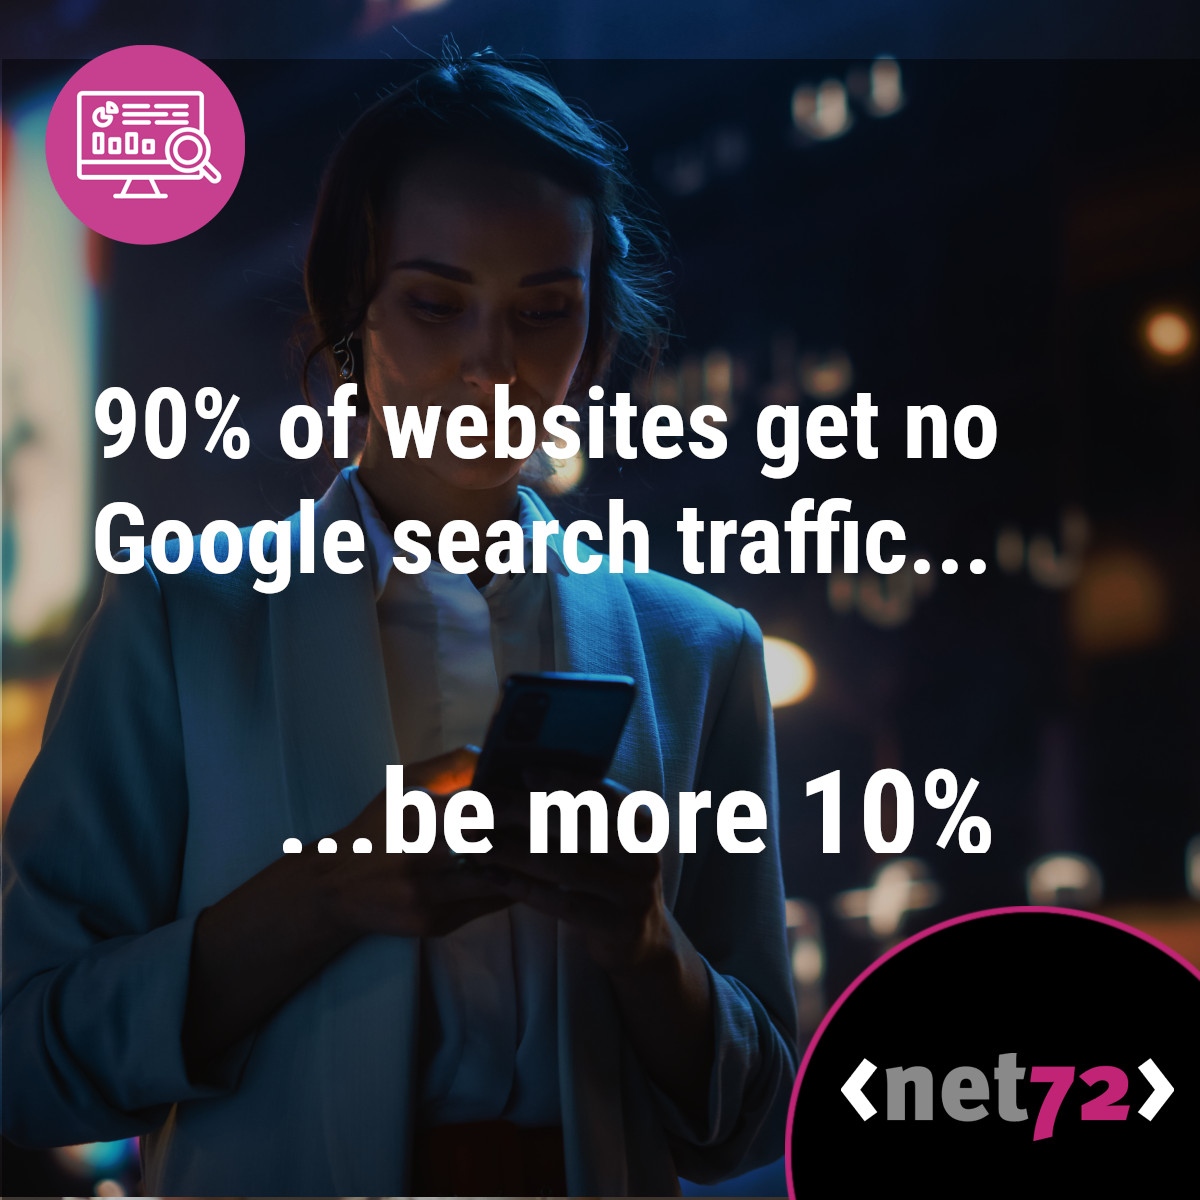 Get more #GoogleTraffic with best practices - use SEO, content marketing & quality backlinks! Aim for organic rankings & reach new audiences. #SEO #ContentMarketing #Backlinks